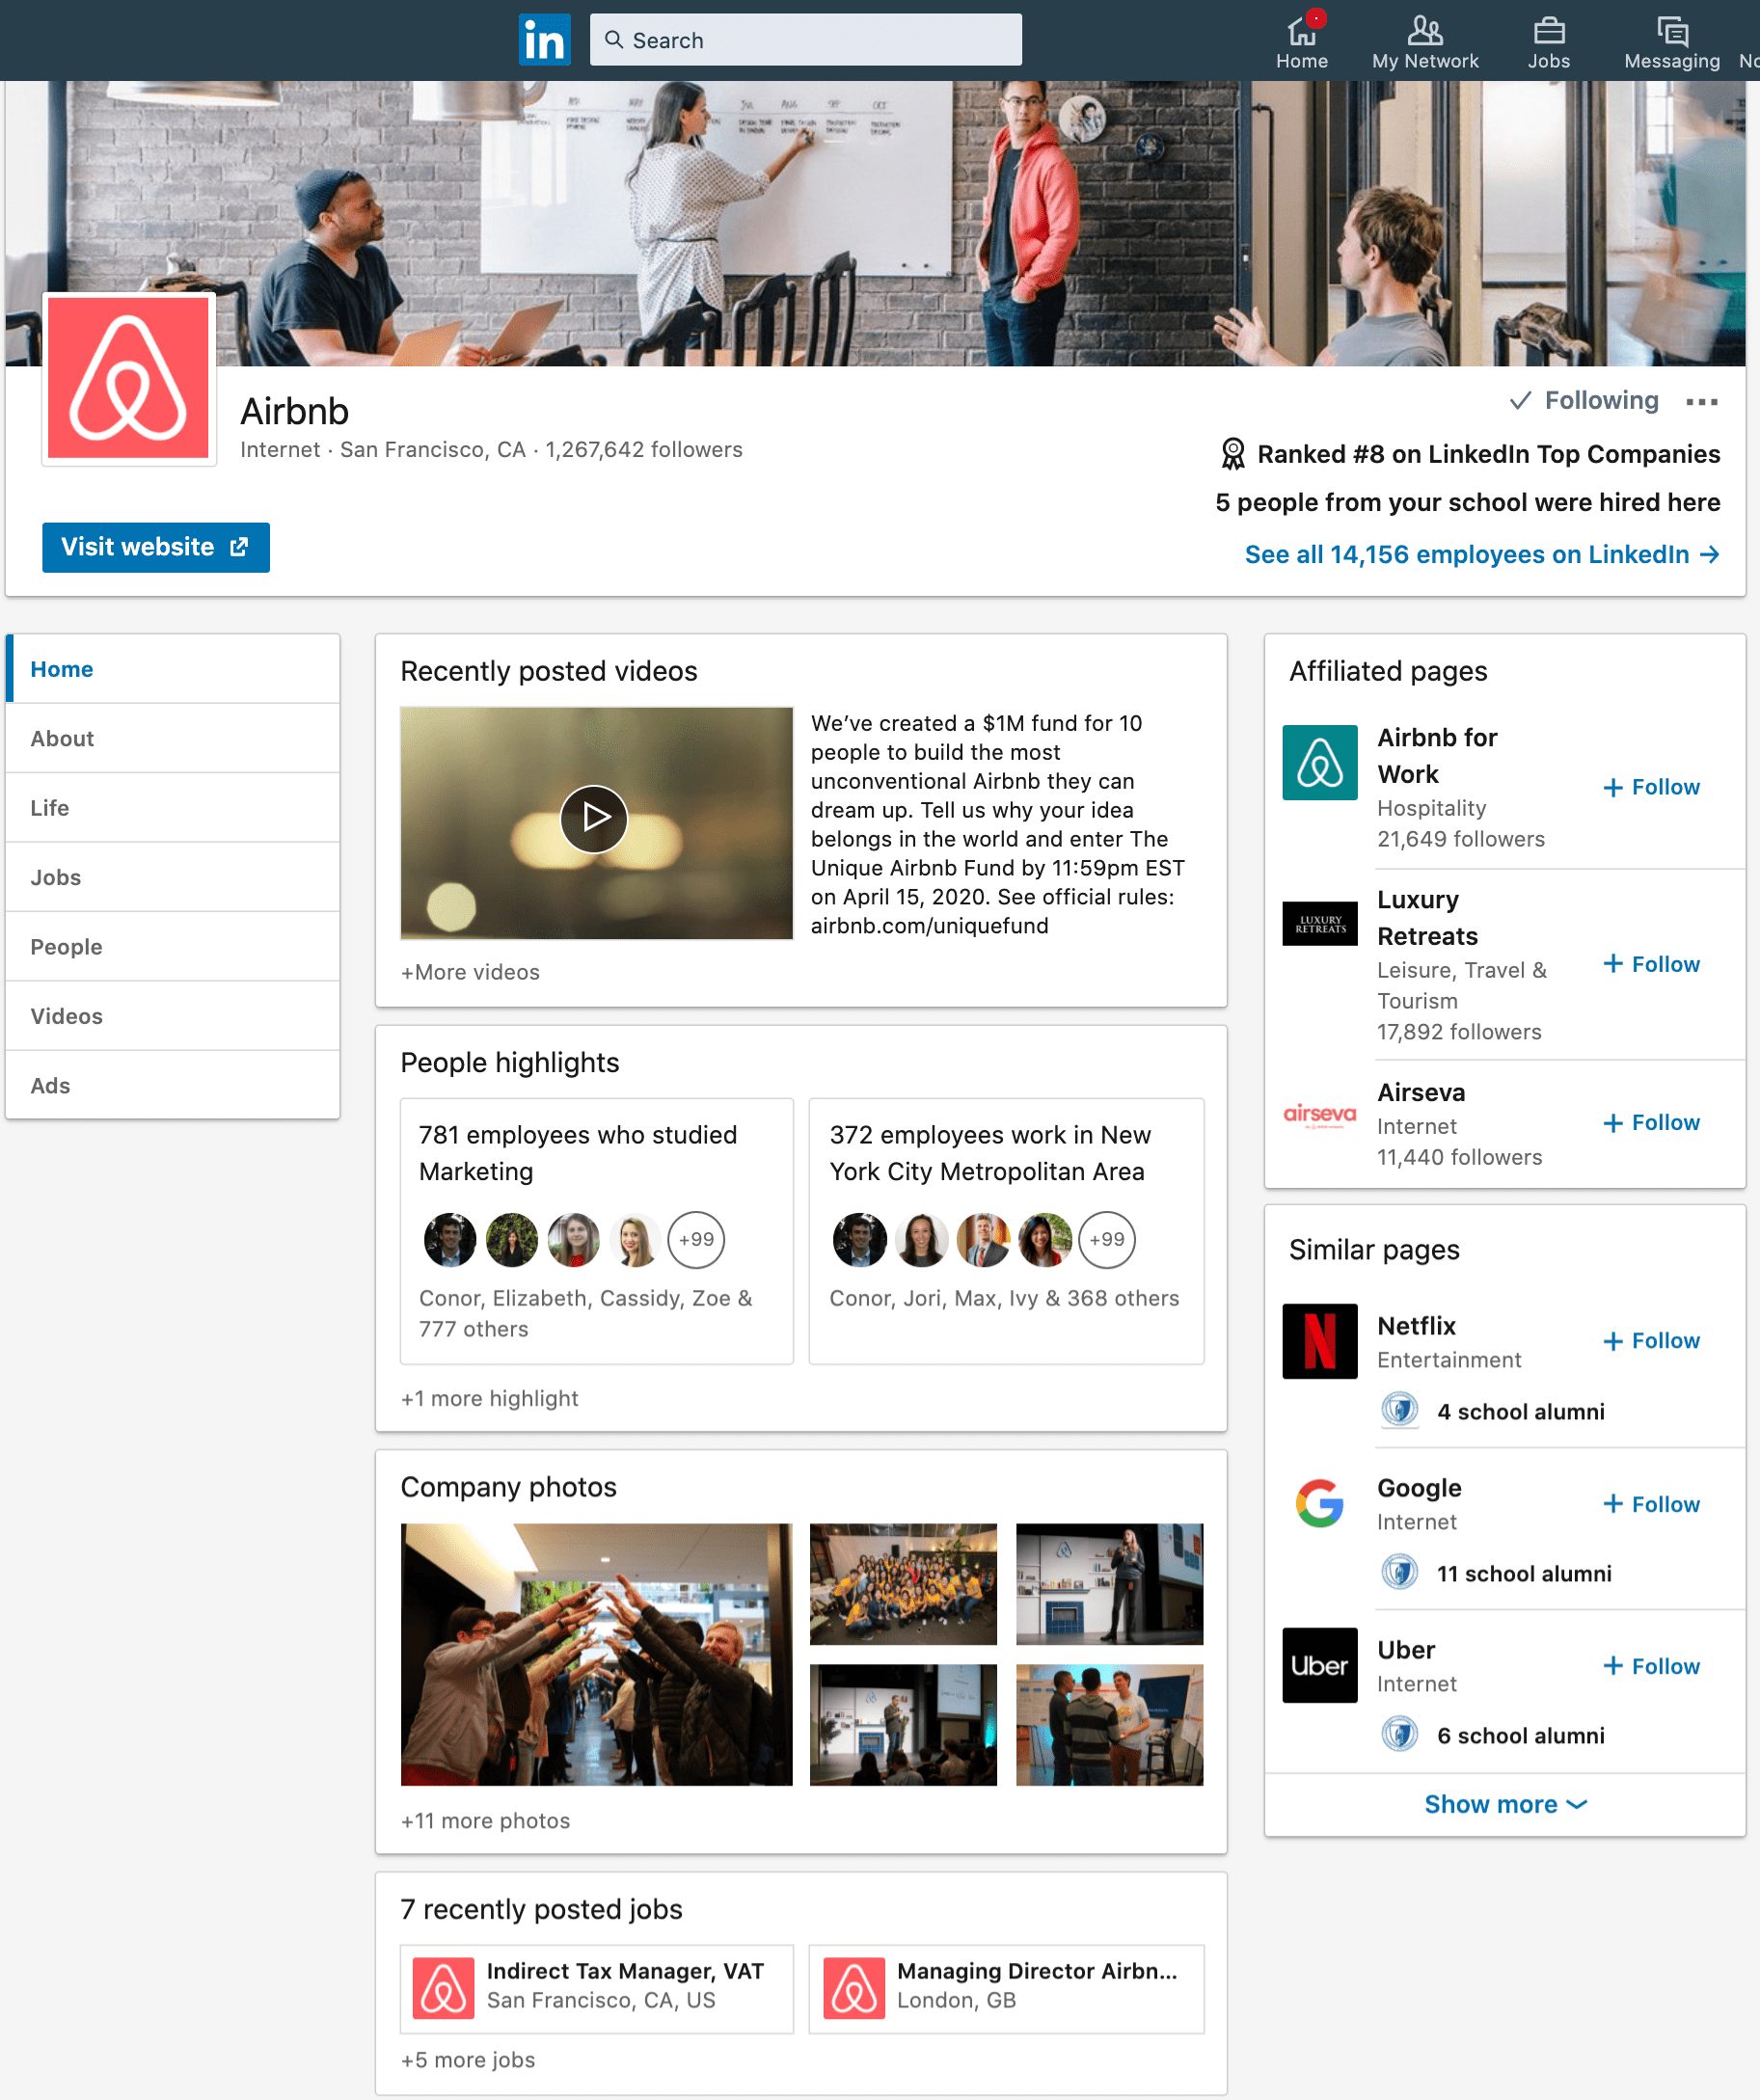 Airbnb Overview LinkedIn